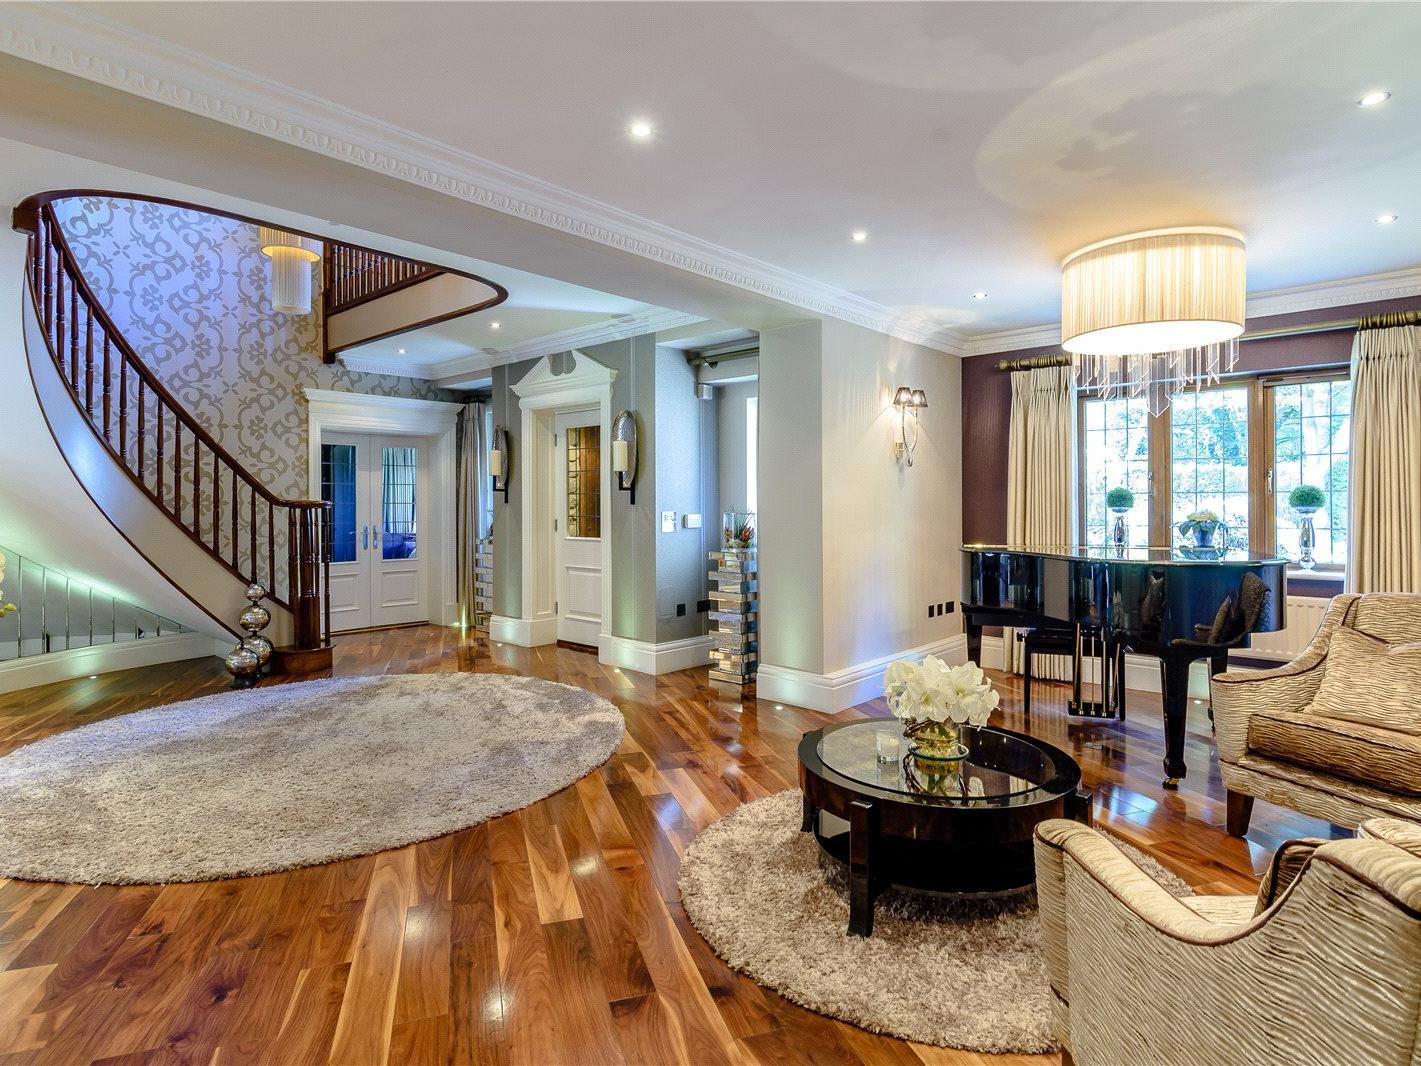 The hallway provides an impressive welcome, and is overlooked by a galleried landing.